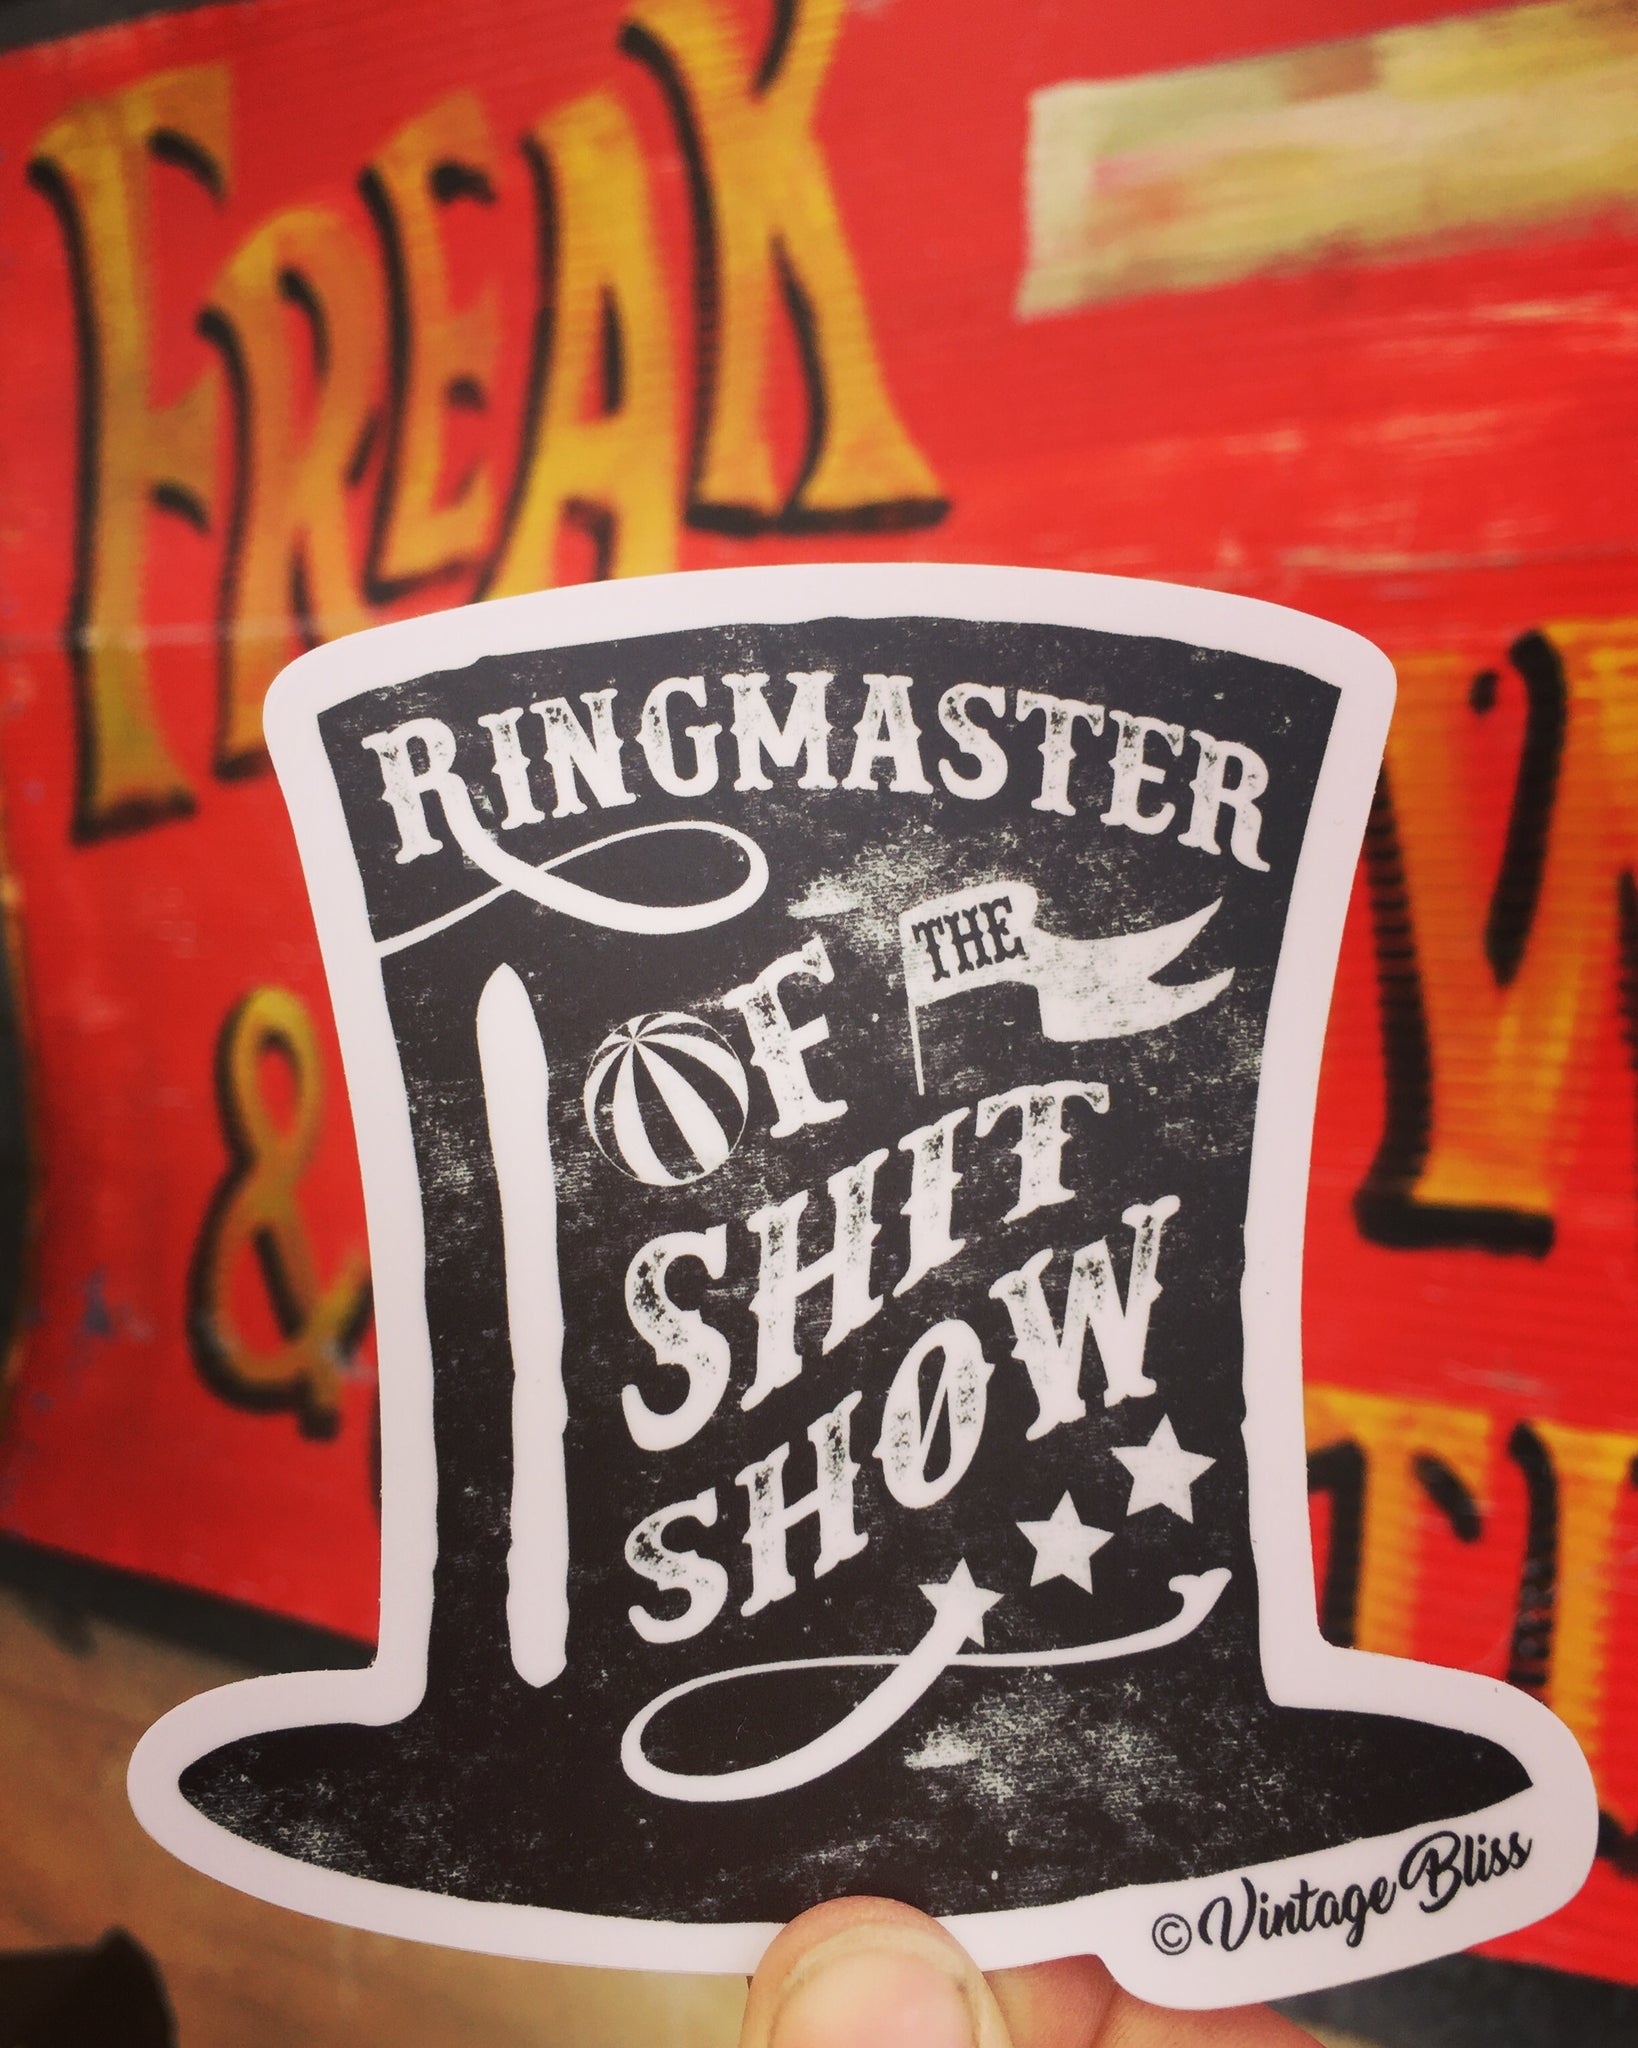 Ringmaster of the Shitshow Tophat Sticker